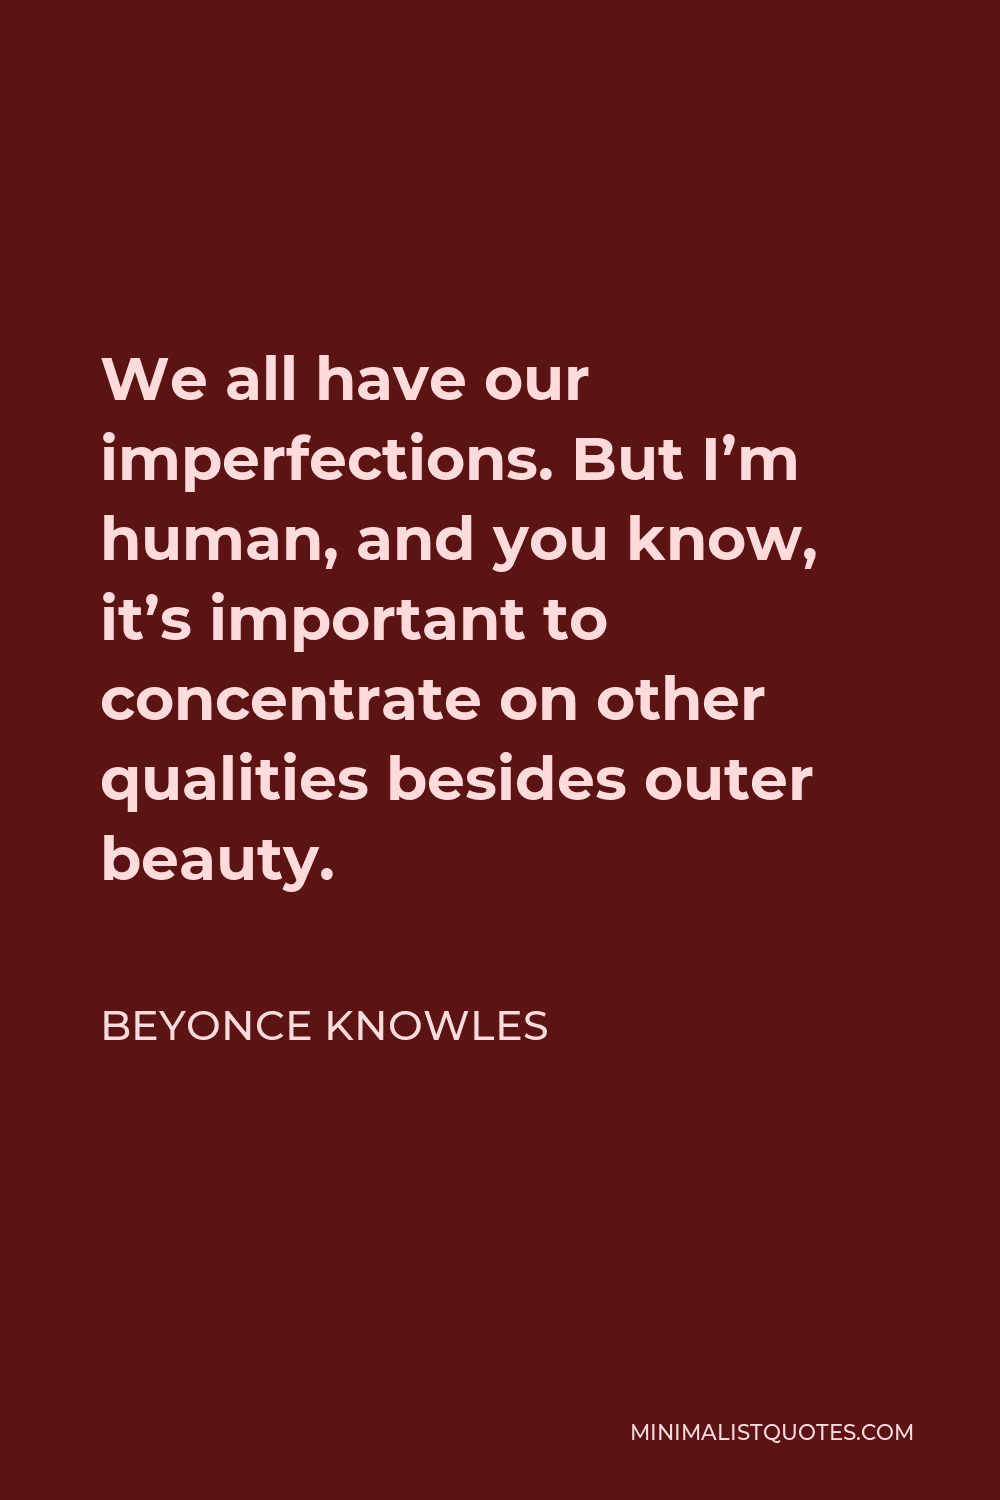 Beyonce Knowles Quote: We all have our imperfections. But I'm human ...